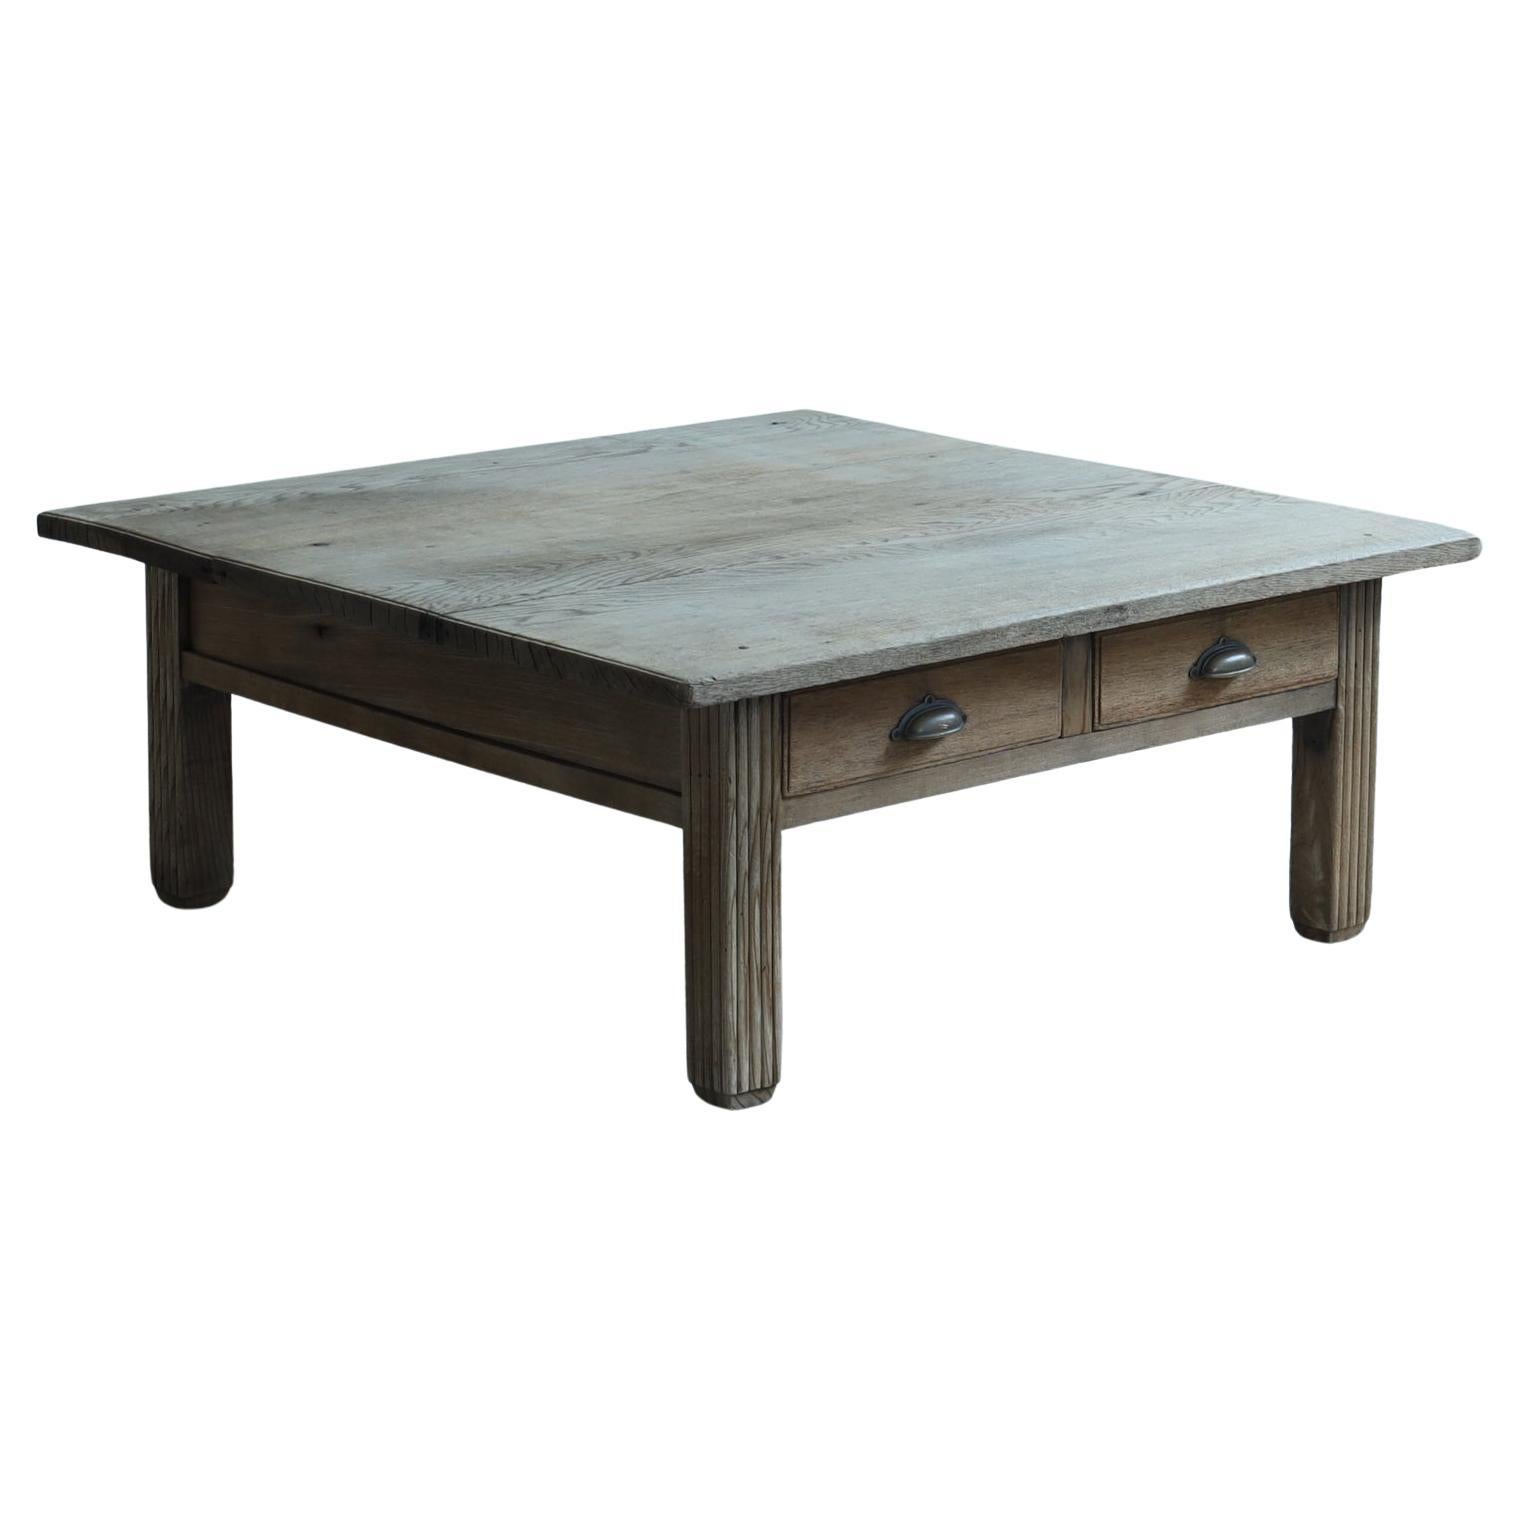 Japanese Antique Coffee Table, Desk, Wabi-Sabi, Early 20th Century For Sale